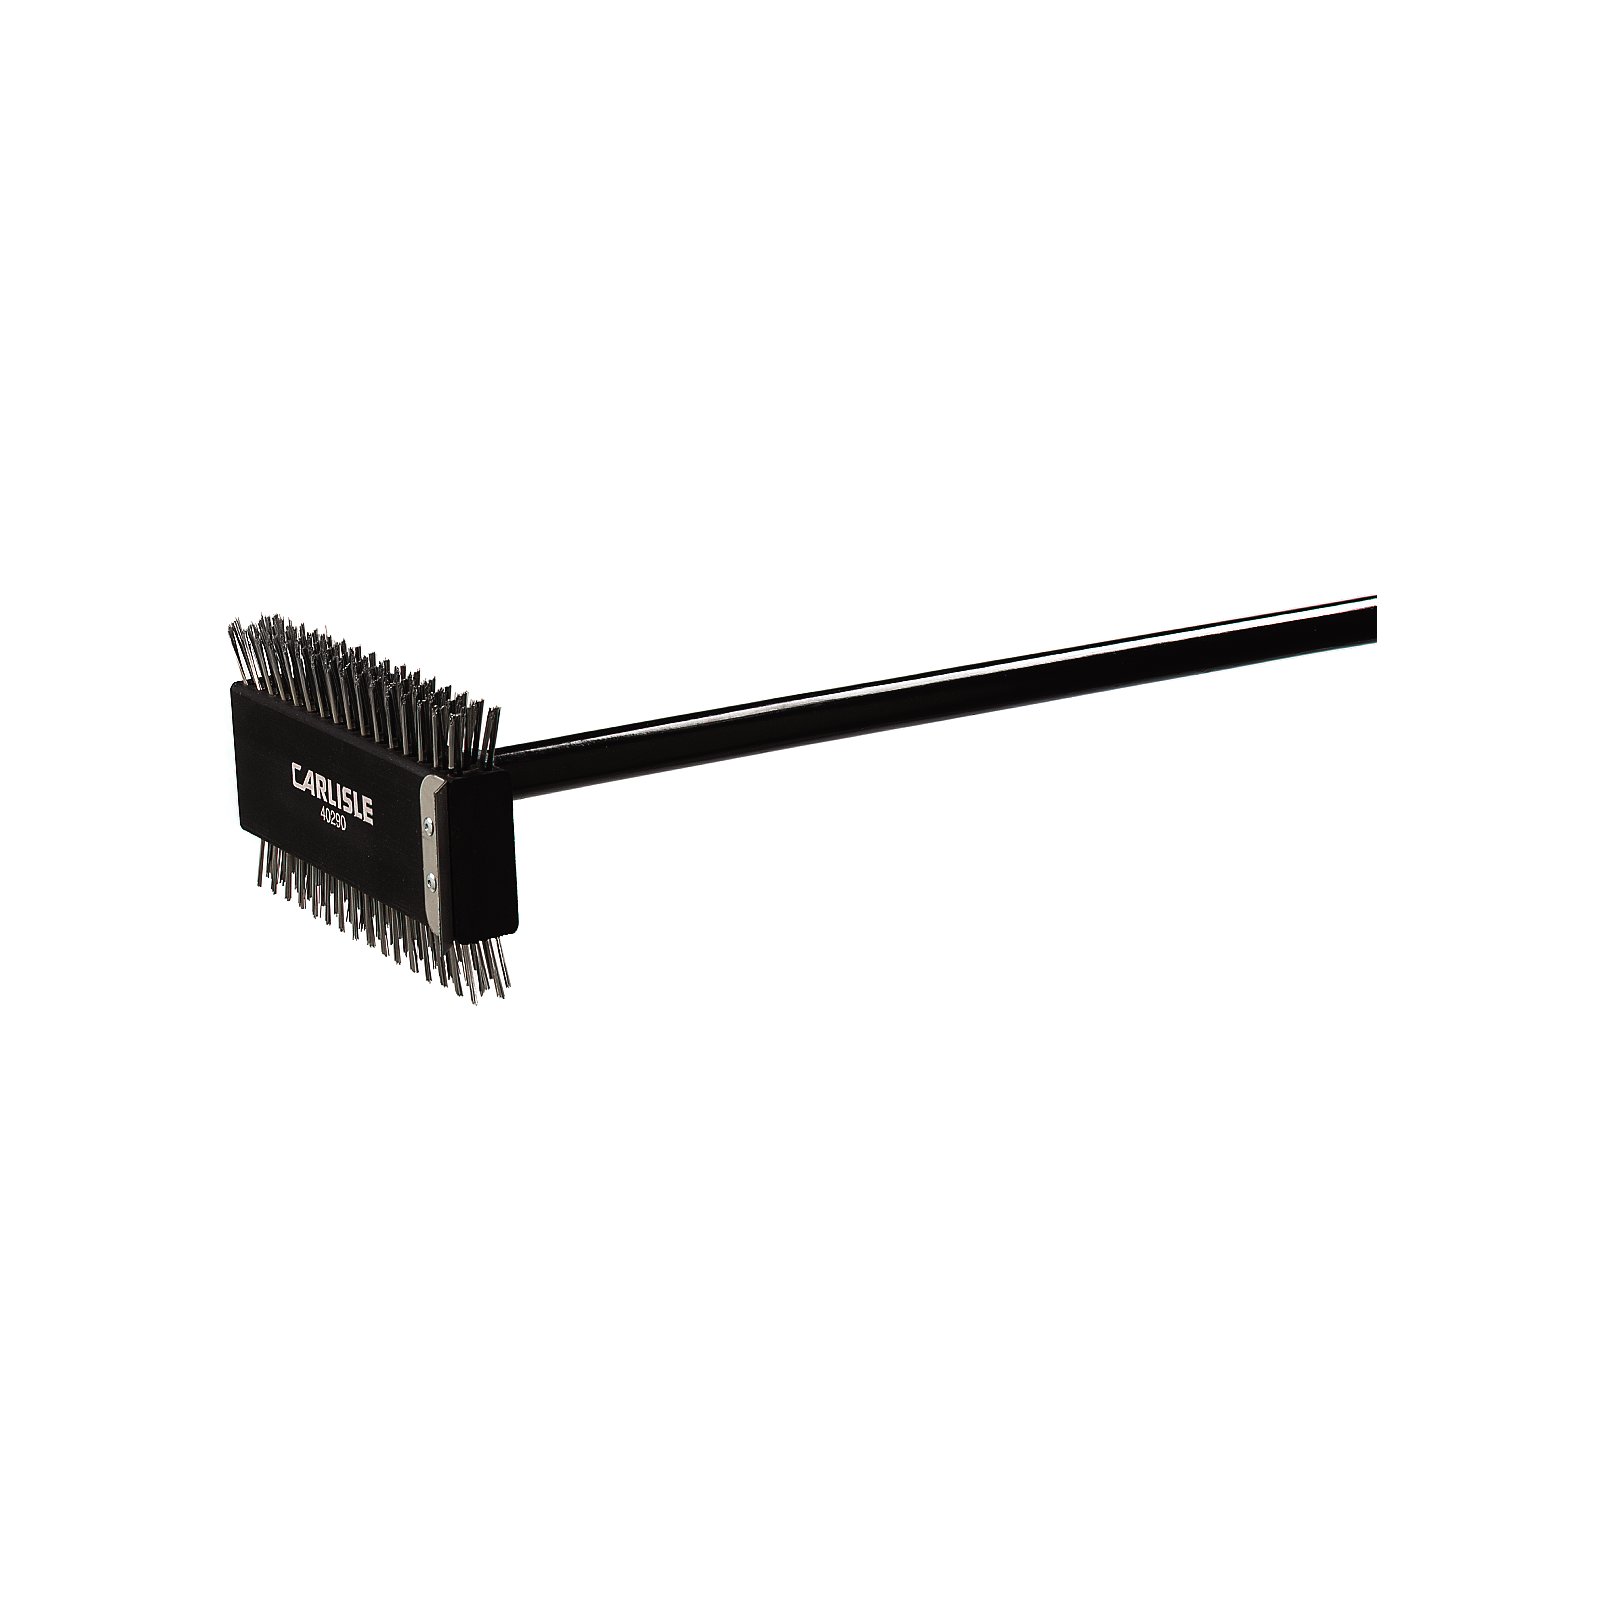 Thunder Group 20 Narrow Broiler / Grill Cleaning Brush